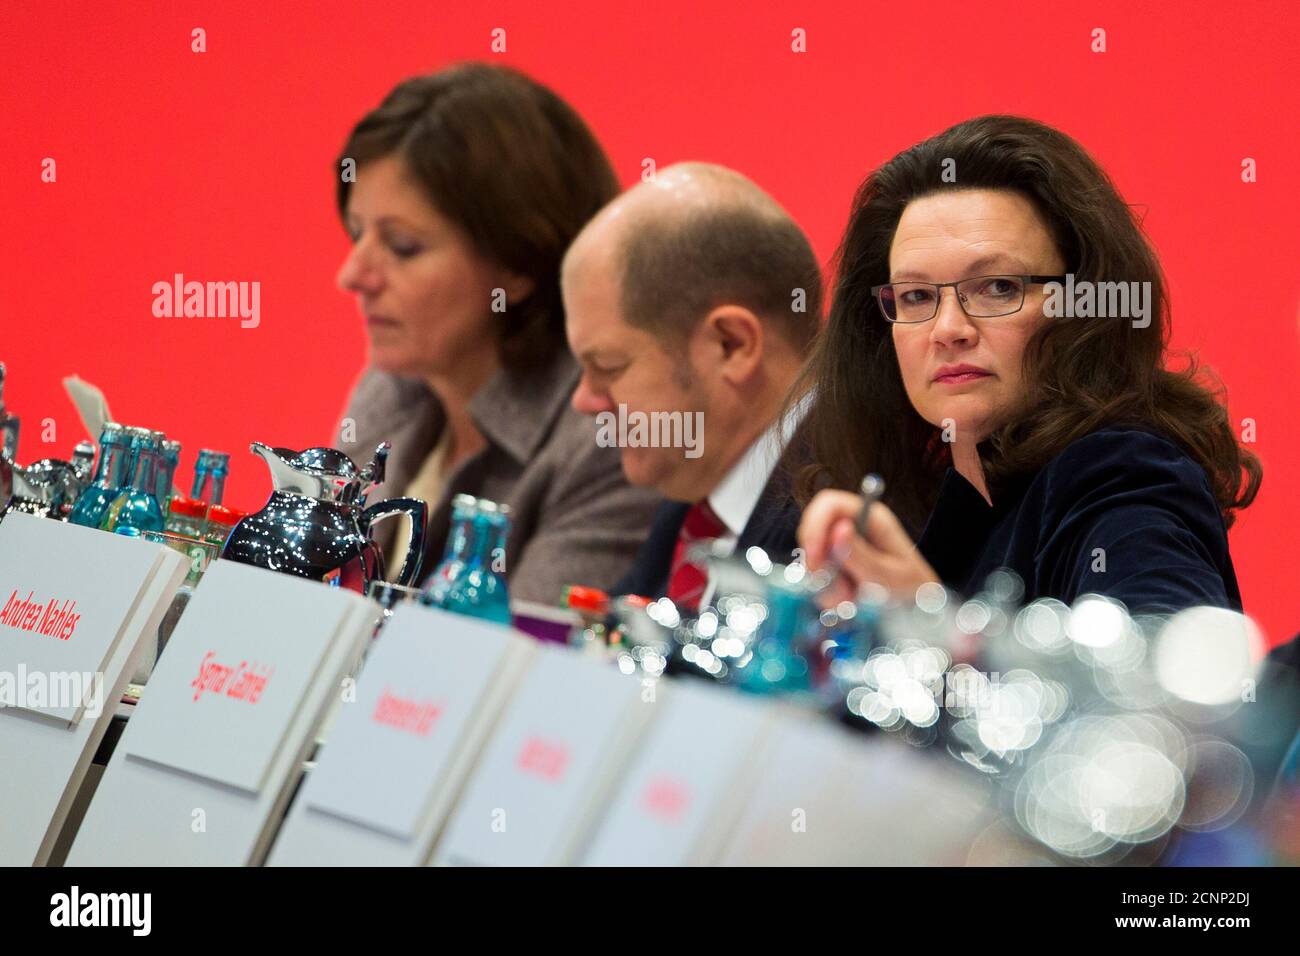 Secretary General of the Social Democratic Party (SPD)  Andrea Nahles, Hamburg Mayor Olaf Scholz (SPD) and Rhineland-Palatinate State Prime Minister Malu Dreyer (SPD) (R-L) attend a SPD party congress in Leipzig, November 15, 2013.   REUTERS/Thomas Peter (GERMANY - Tags: POLITICS) Stock Photo